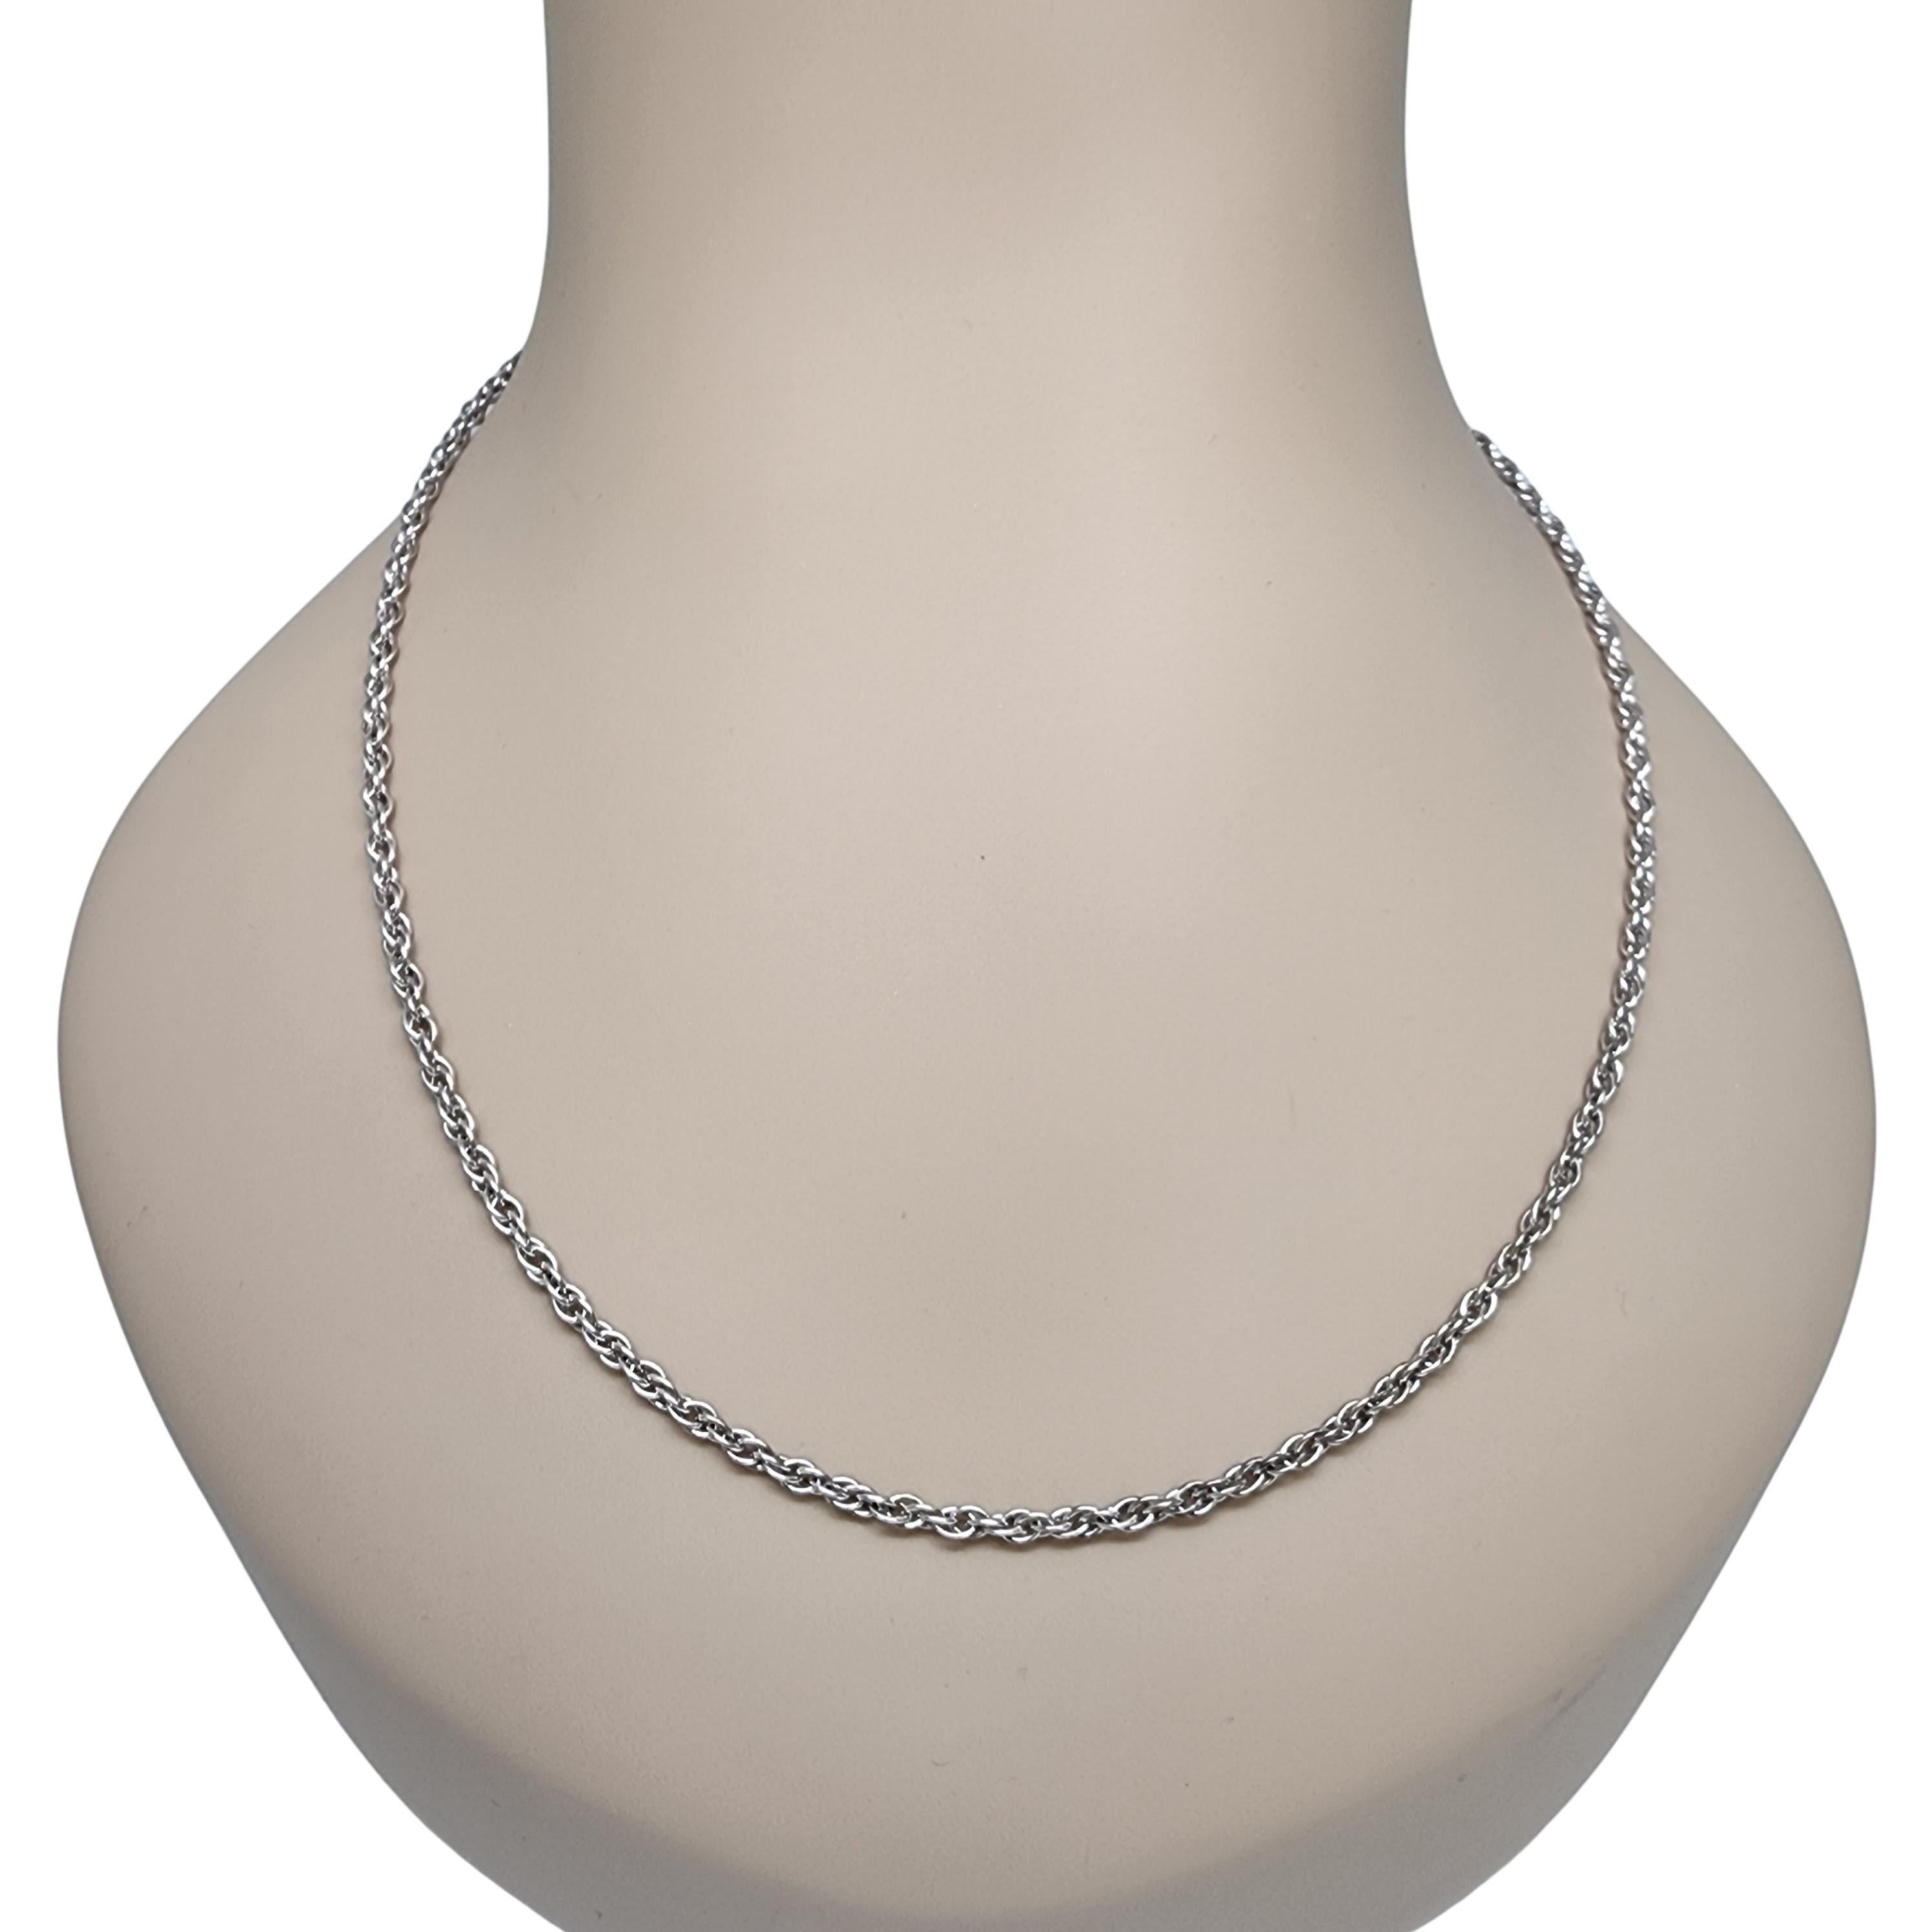 Women's James Avery Sterling Silver Twist Chain Necklace #16610 For Sale